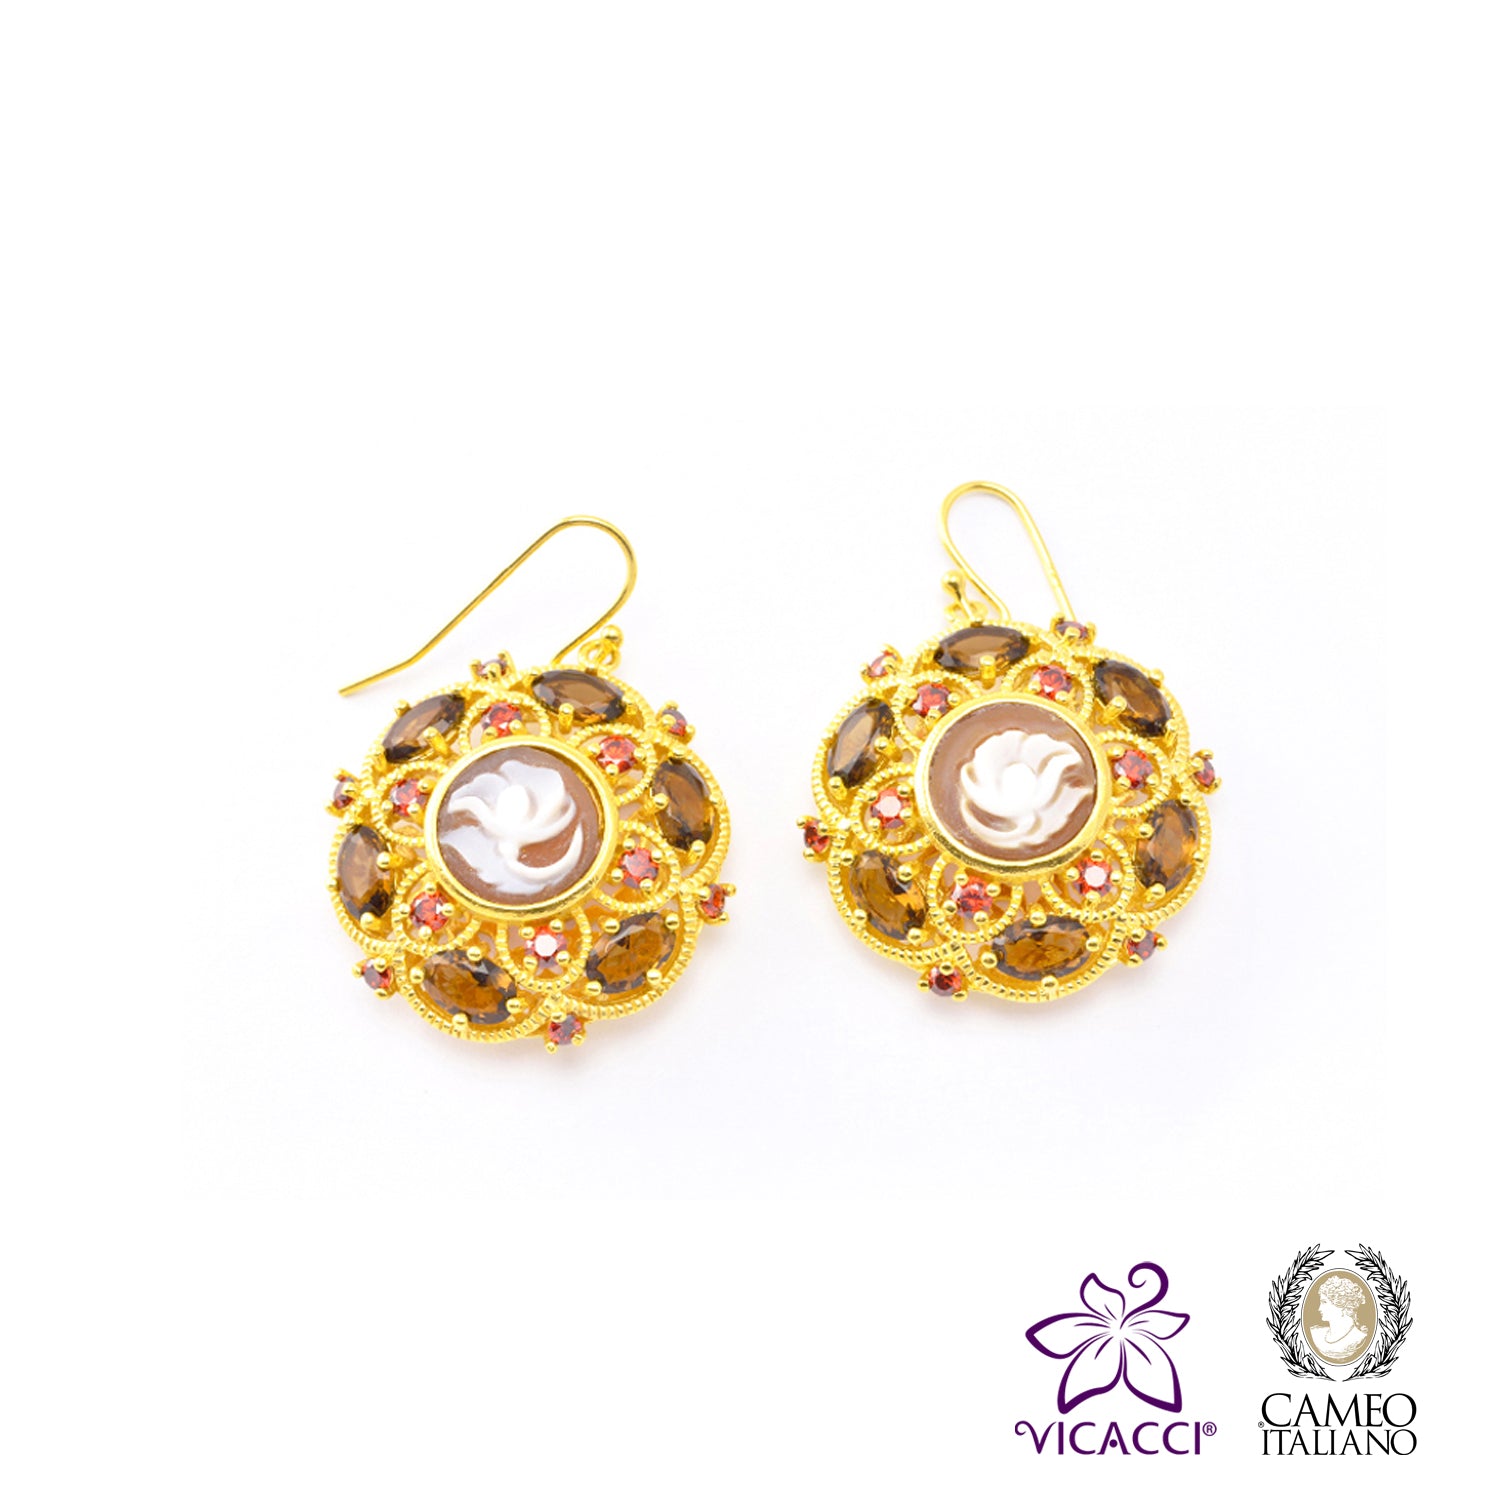 Cameo Italiano, O58 Earrings, Gold Plated Sterling Silver